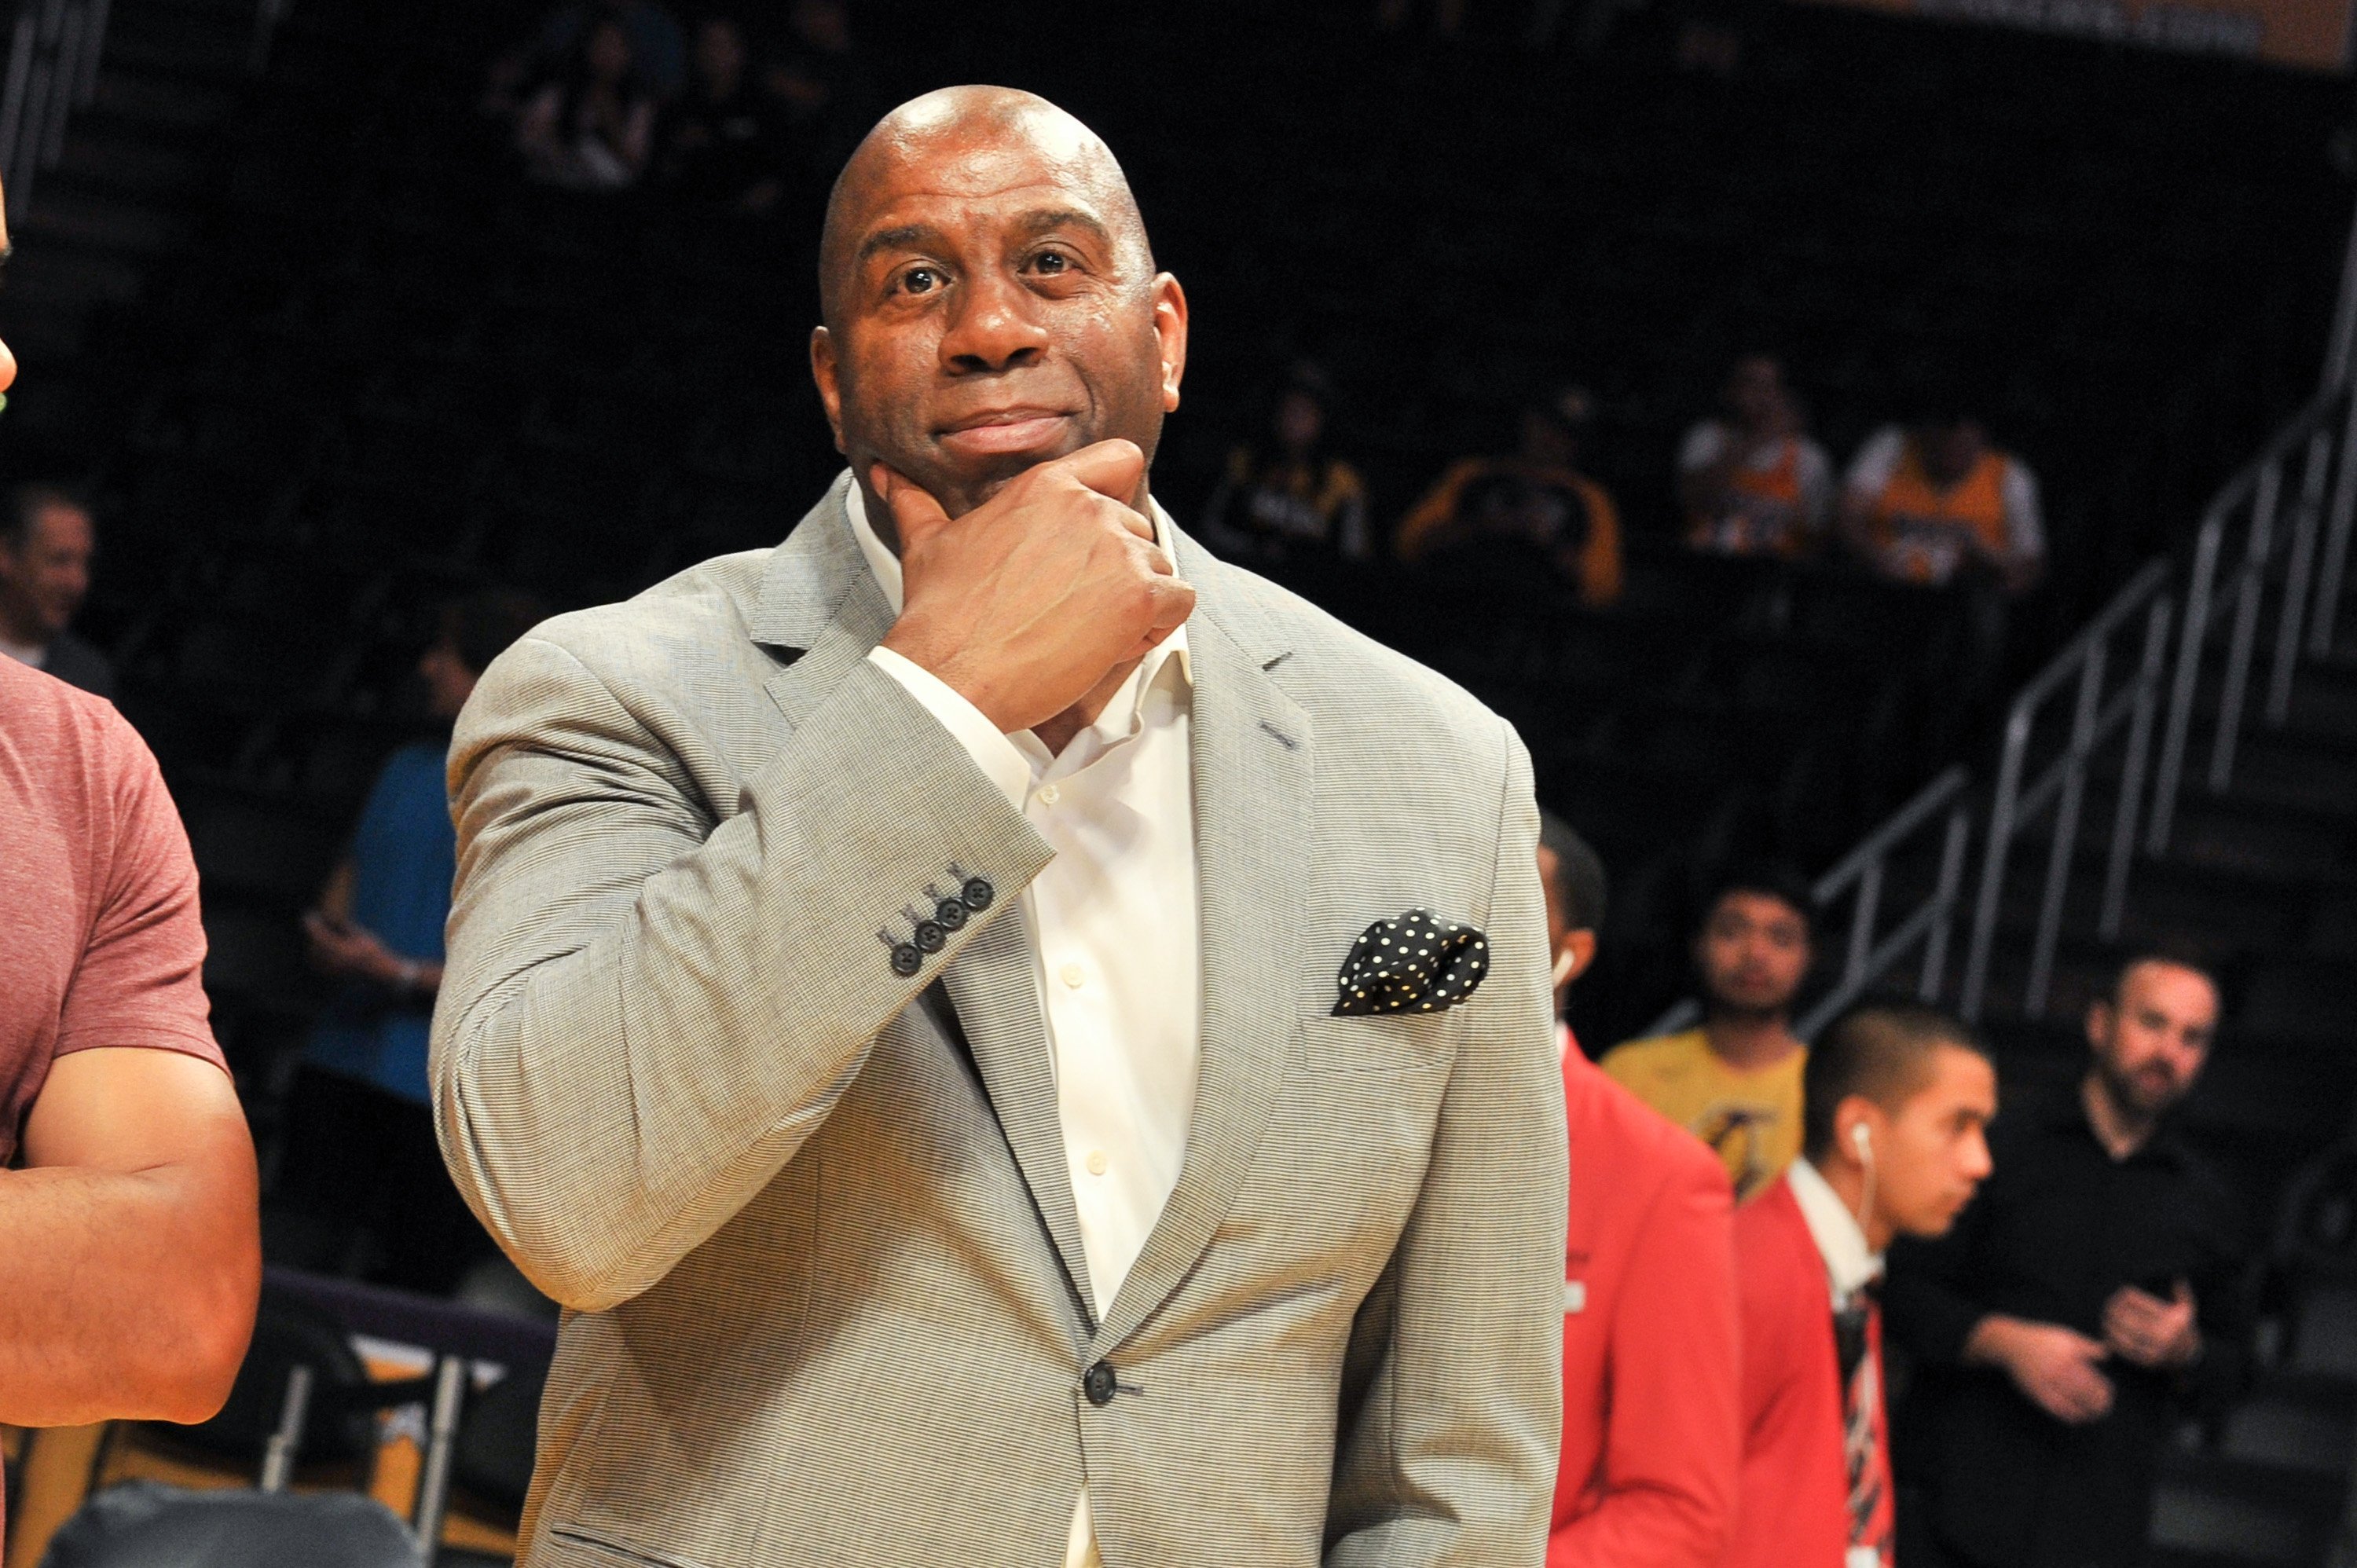 Earvin Magic Johnson attends a basketball game | Photo: Getty Images